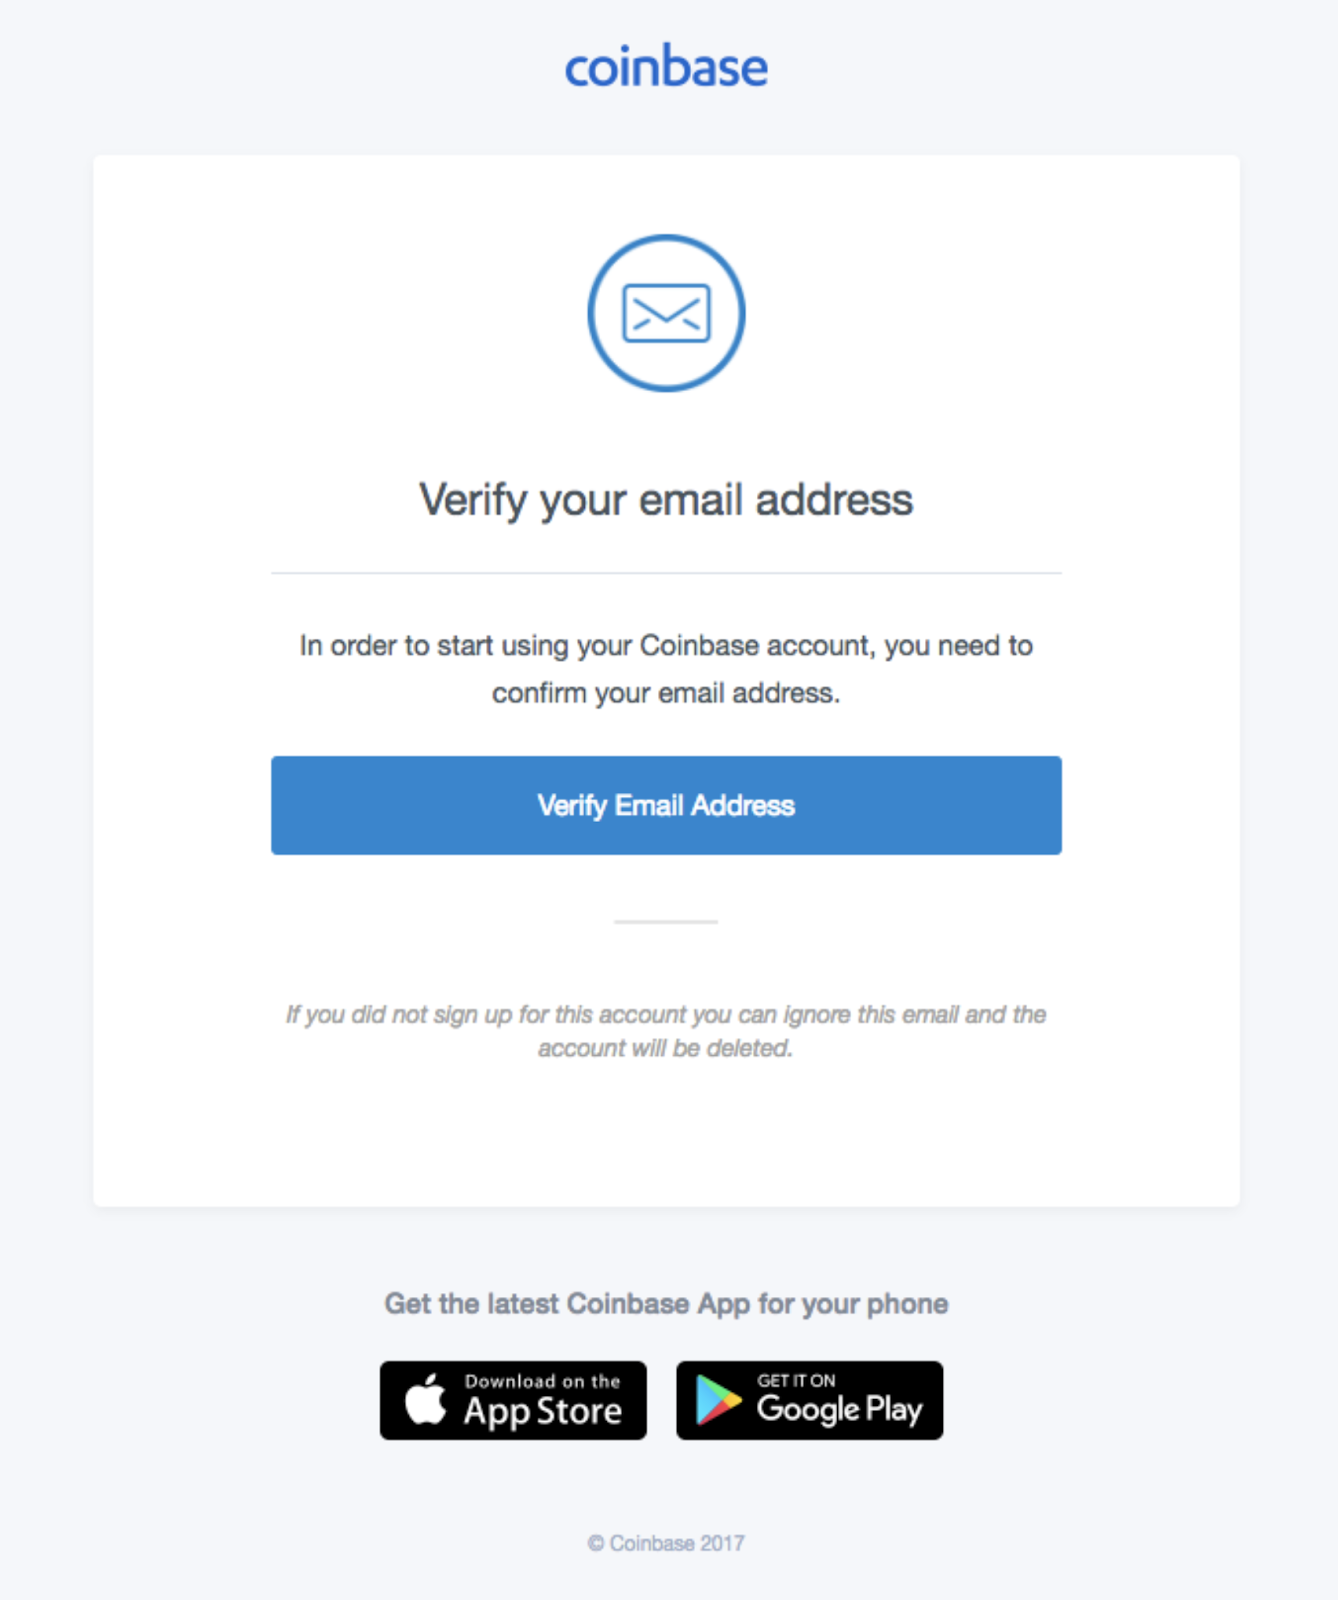 Example of a Coinbase email address verification email 